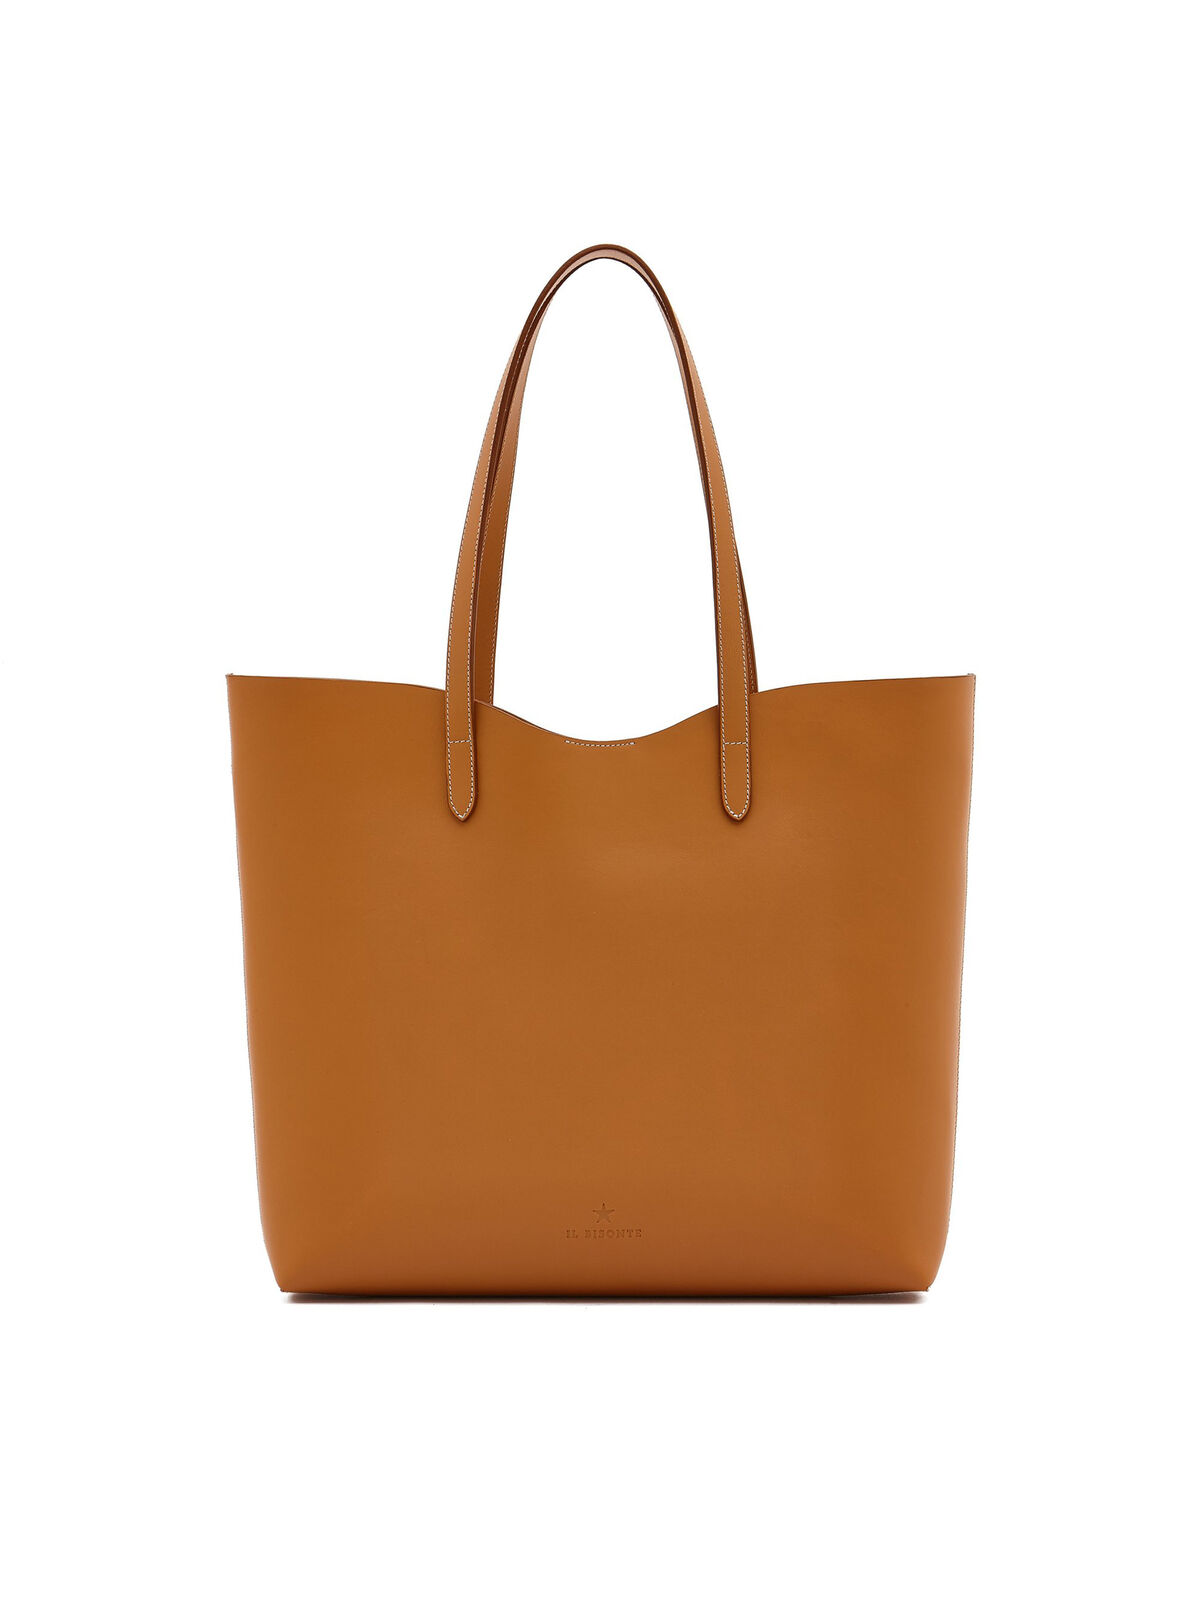 Il Bisonte - Large Leather Handle Tote Bag | NIC+ZOE